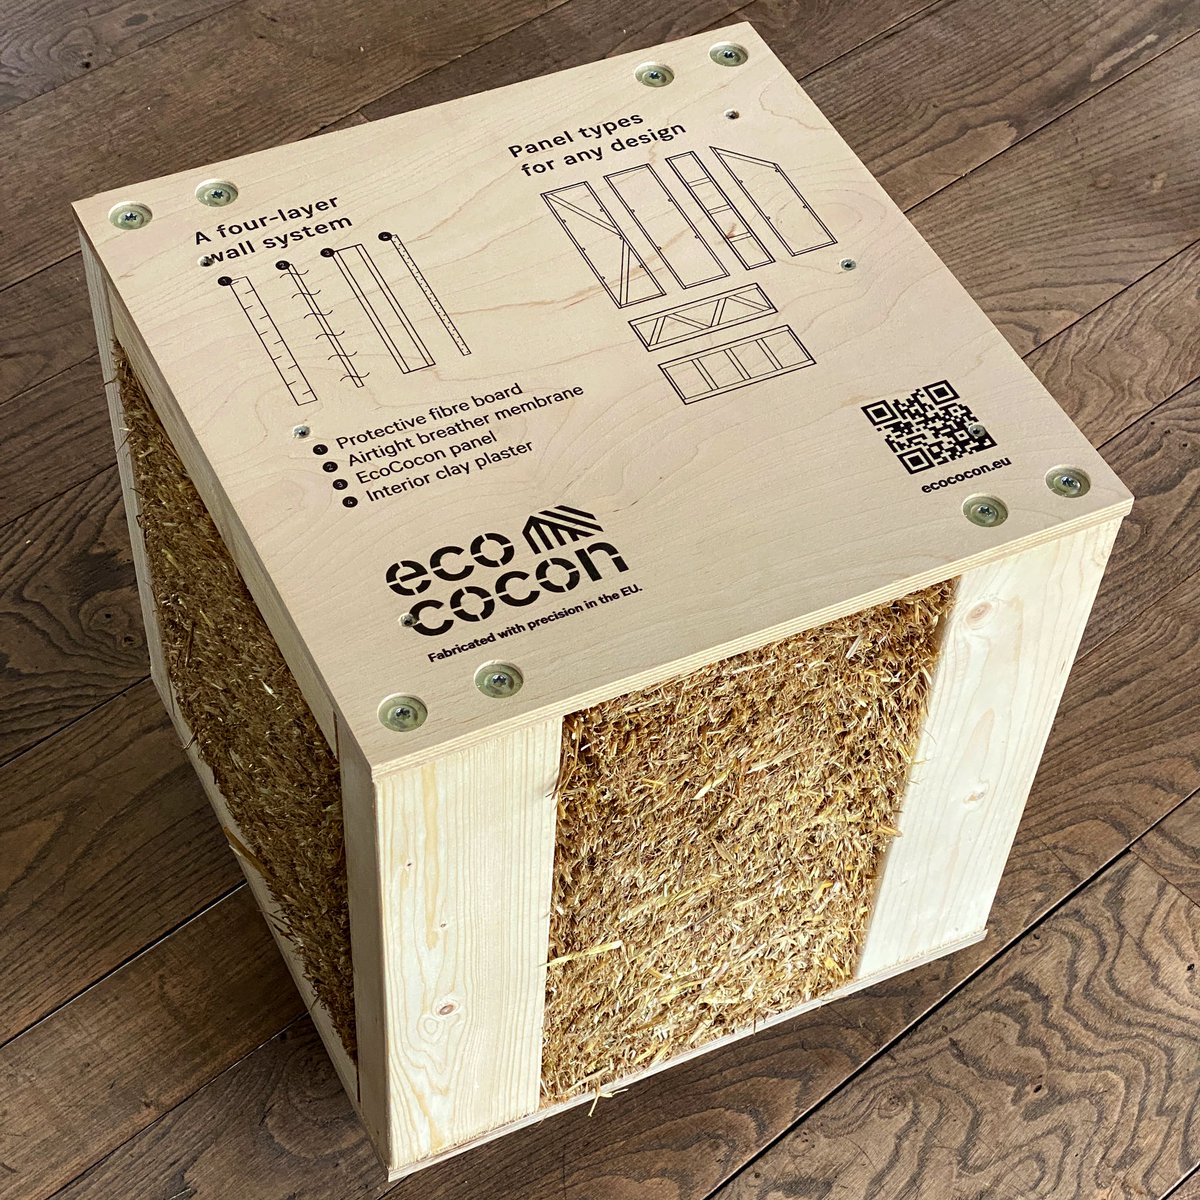 New @Ecococon samples look 👌

#Biobased #construction 🌱